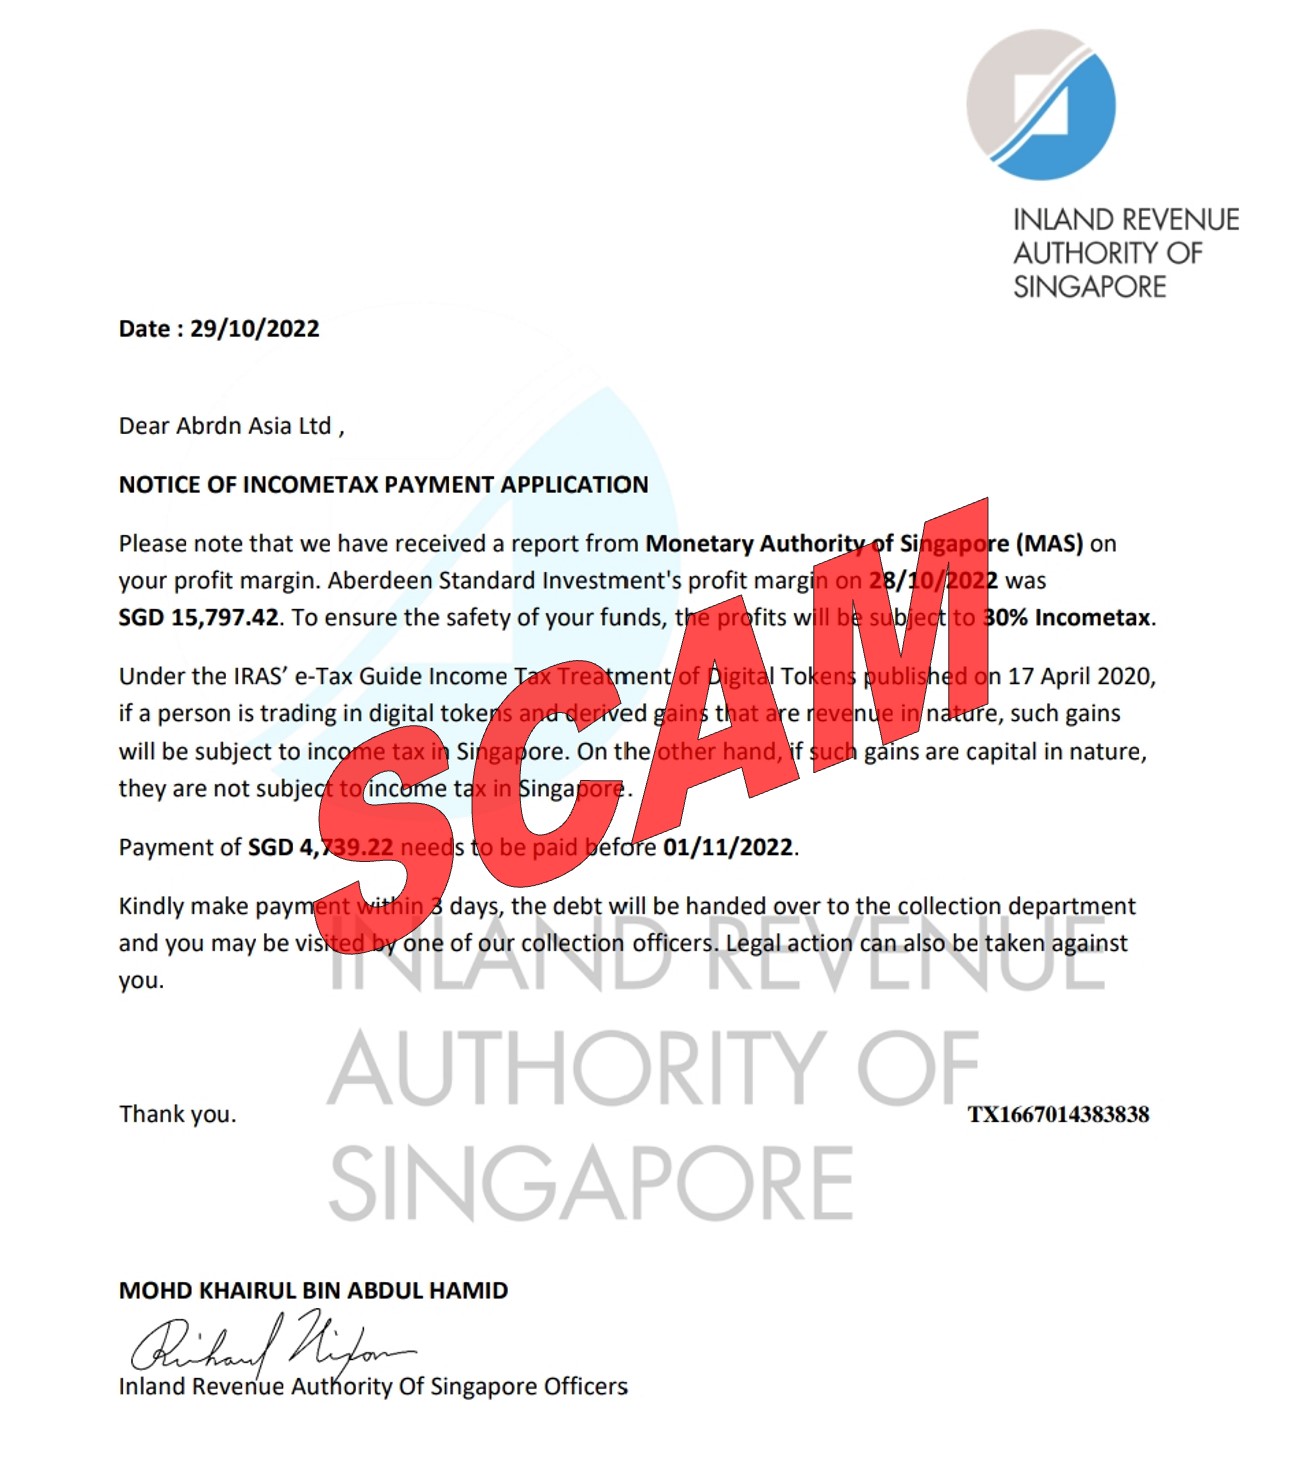 Screenshot of scam letter seeking tax payment on investment profit purportedly from IRAS, instructing the recipient to pay income tax on their investment profit to ensure “the safety of their funds”